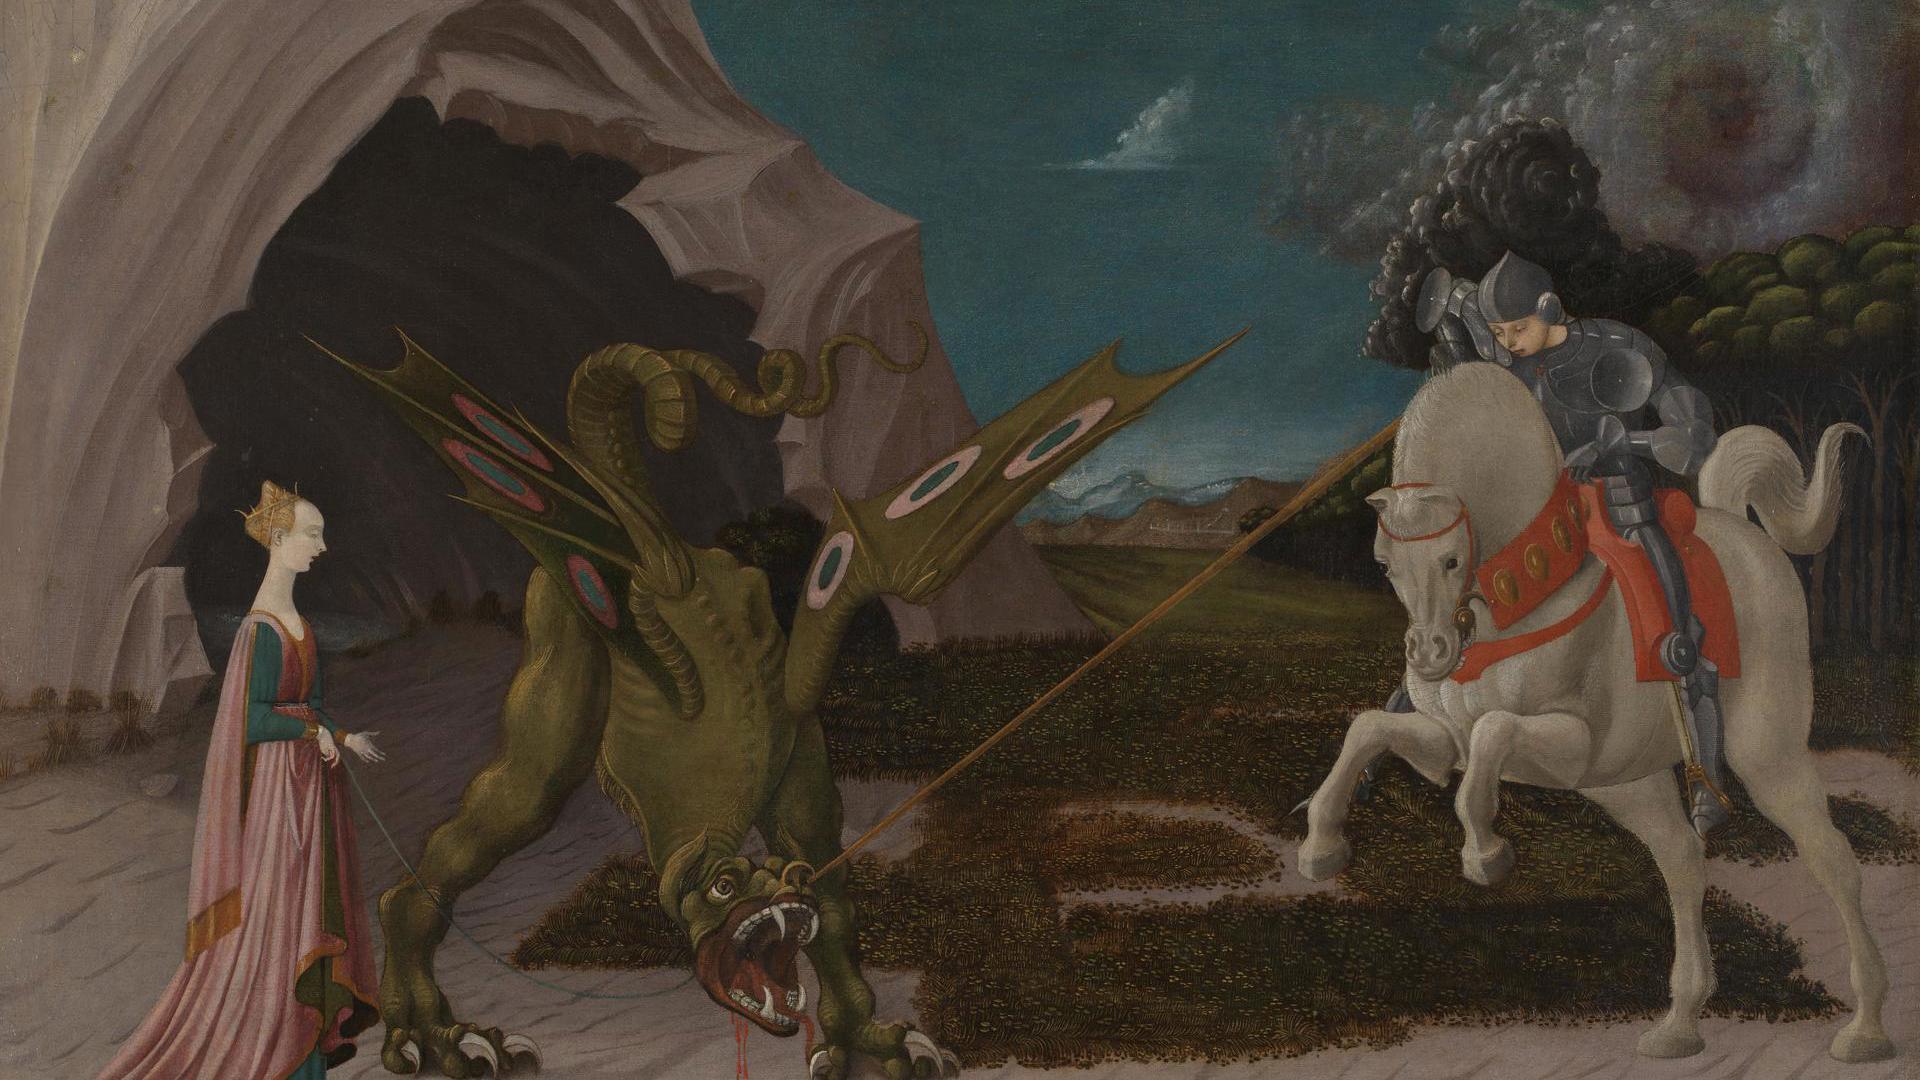 Saint George and the Dragon by Paolo Uccello